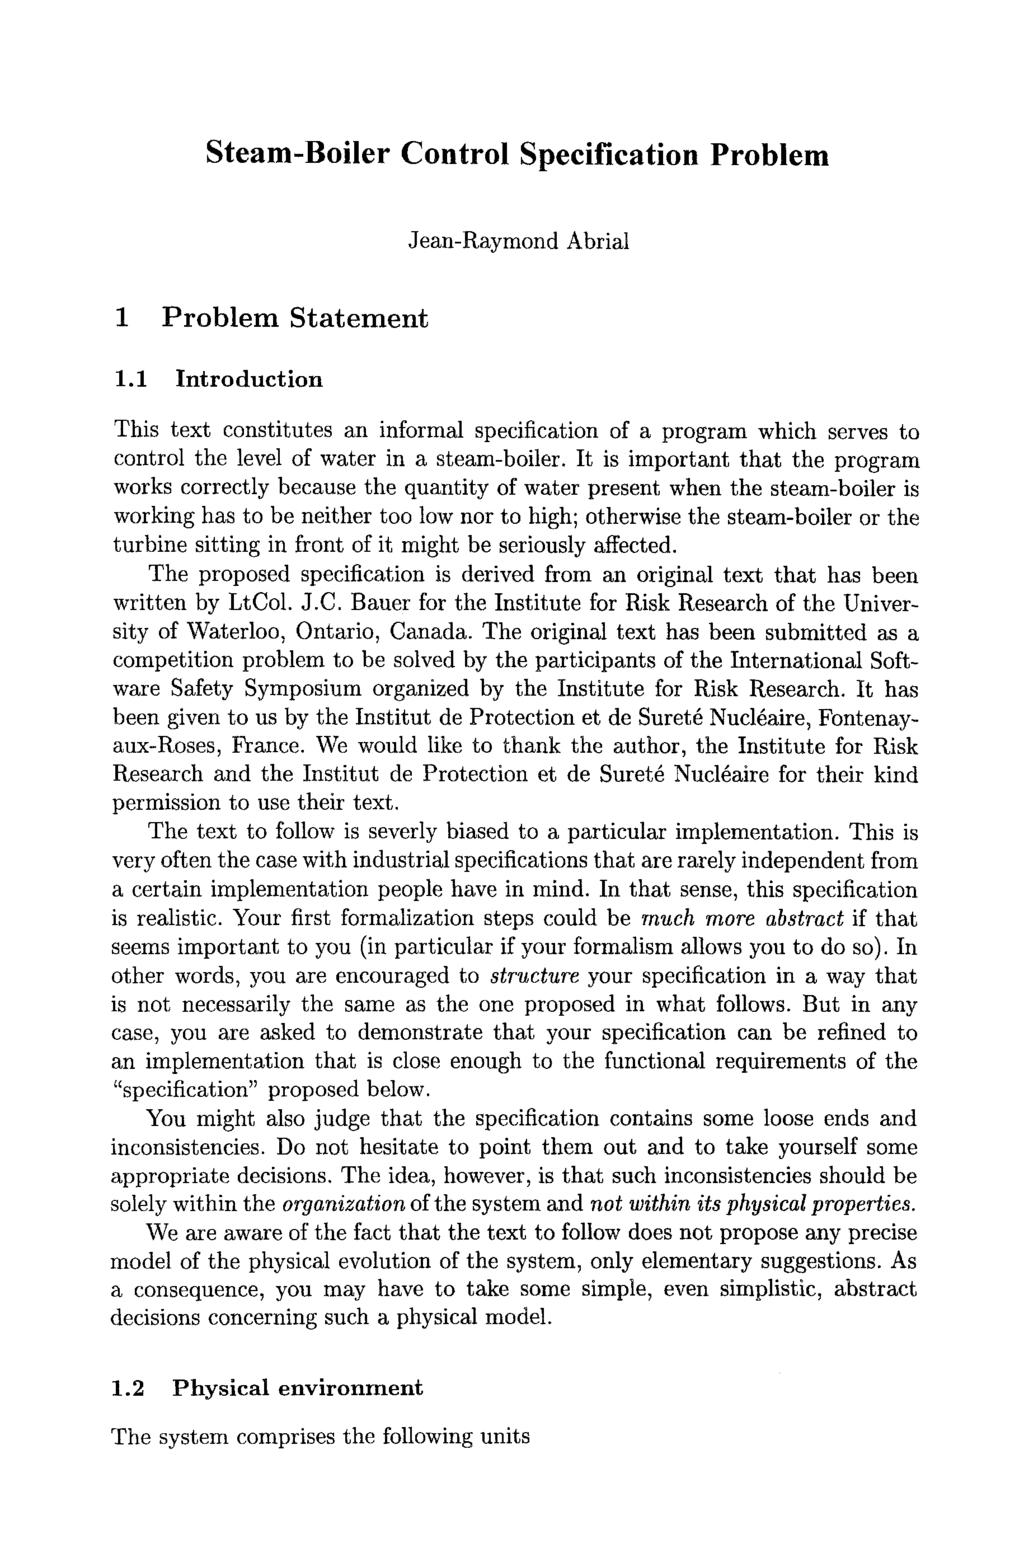 Steam-Boiler Control Specification Problem Jean-Raymond Abrial 1 Problem Statement 1.